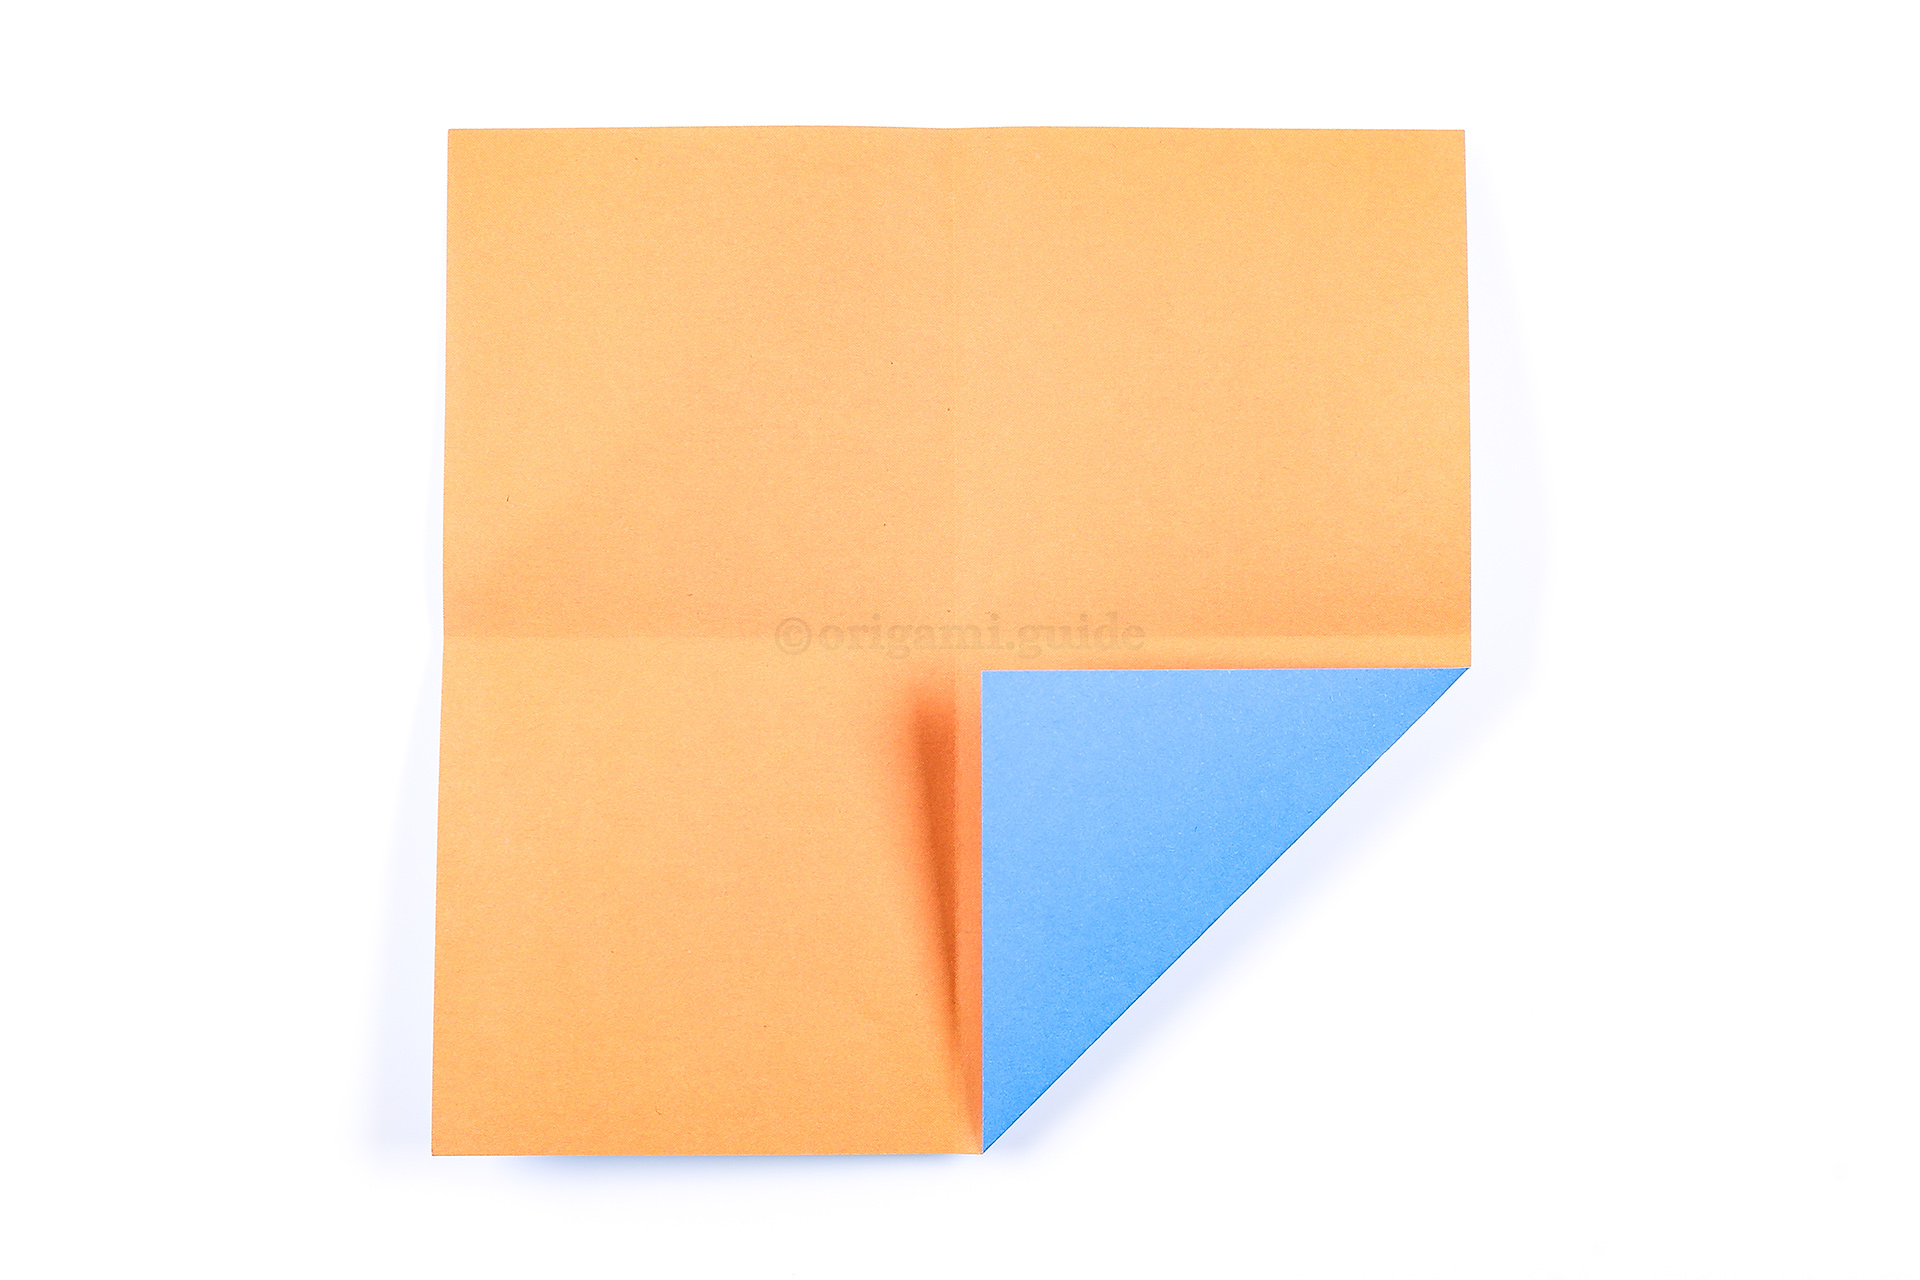 Using the creases as guidelines, fold one of the corner to the middle, leaving a small gap.